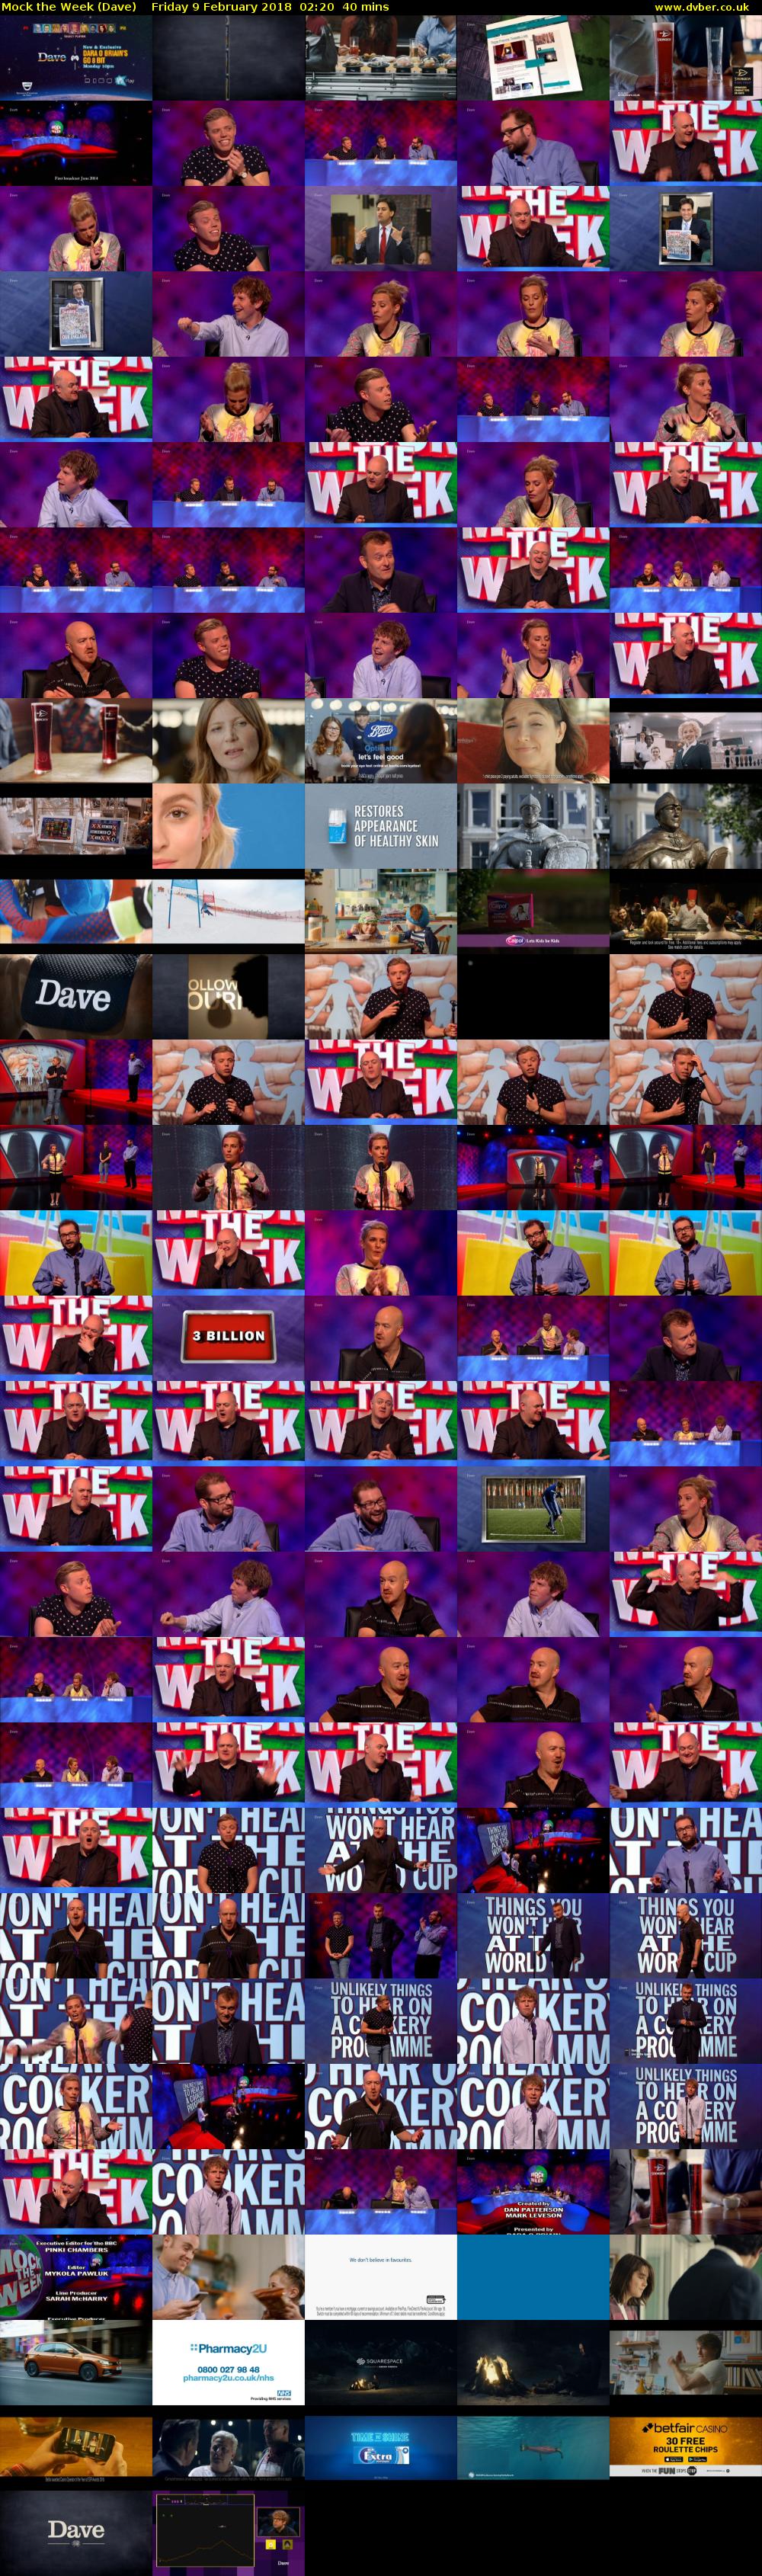 Mock the Week (Dave) Friday 9 February 2018 02:20 - 03:00